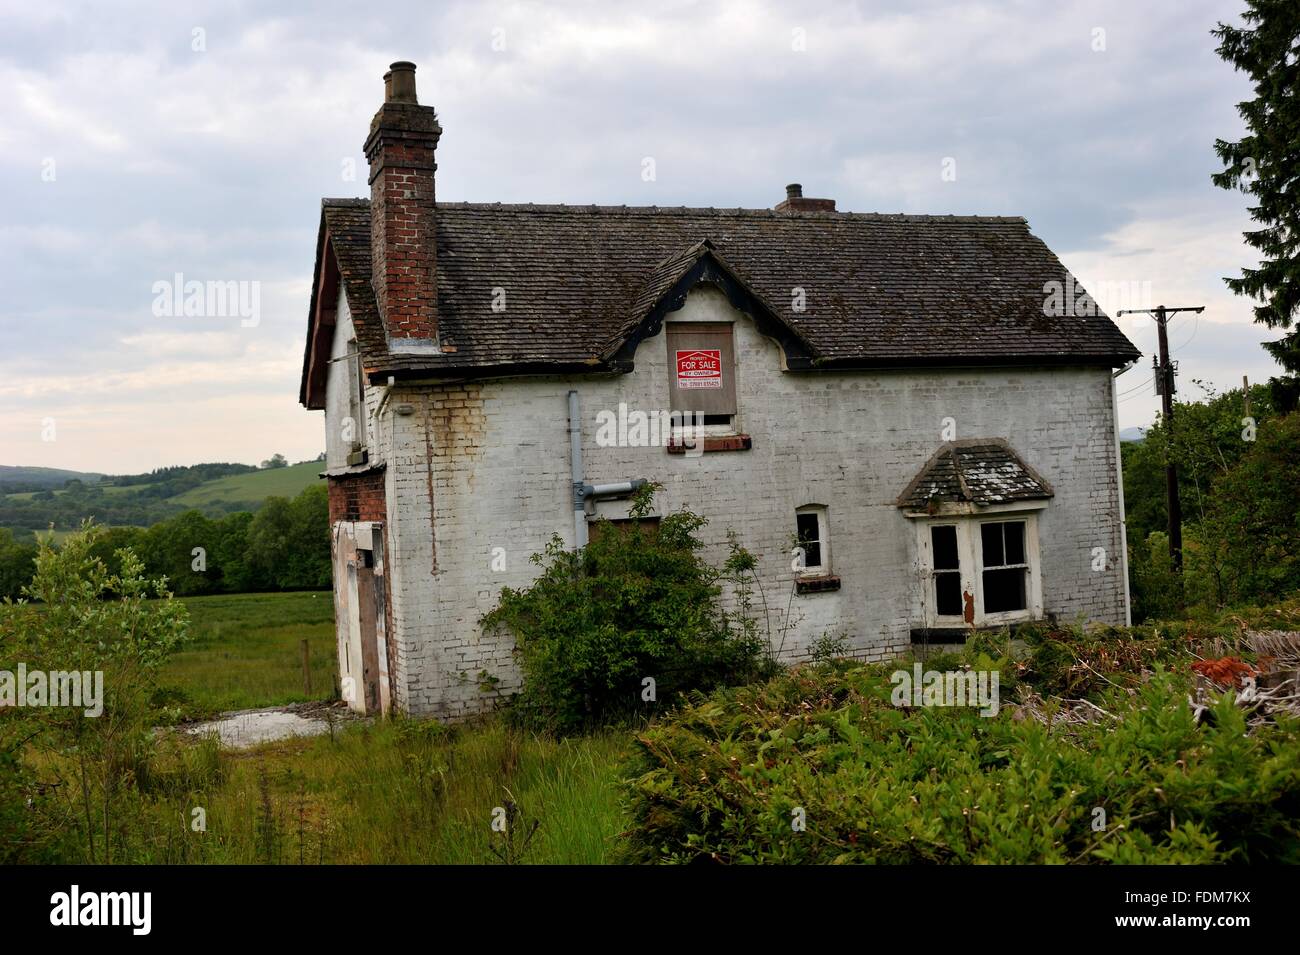 Cynghordy station. Derelict house, possibly former railway house. Cynghordy, Carmarthenshire, Wales, UK. Stock Photo